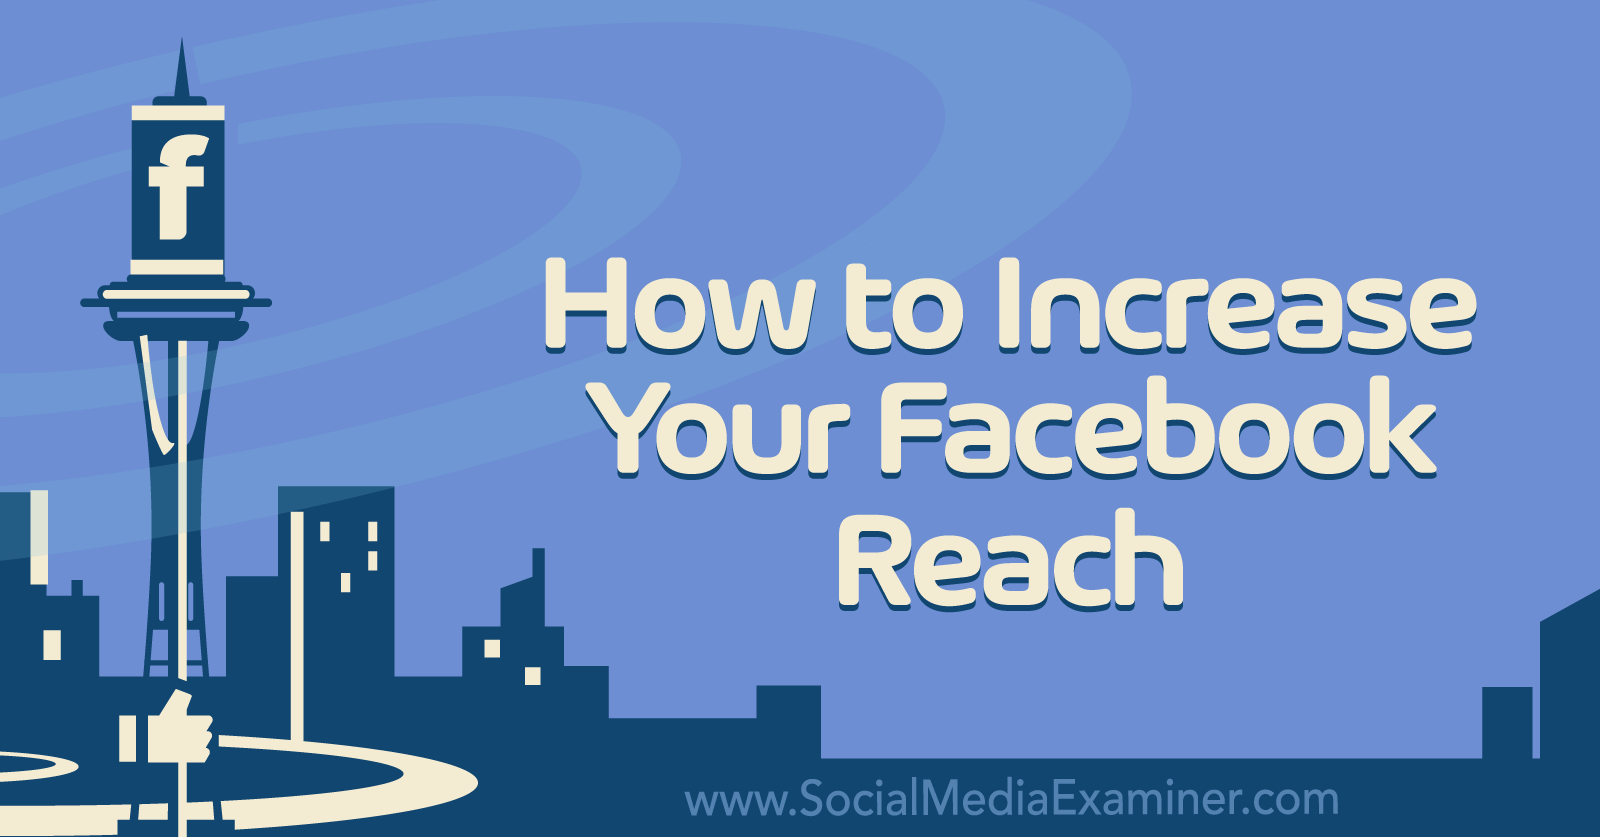 How to Increase Your Facebook Reach on Social Media Examiner